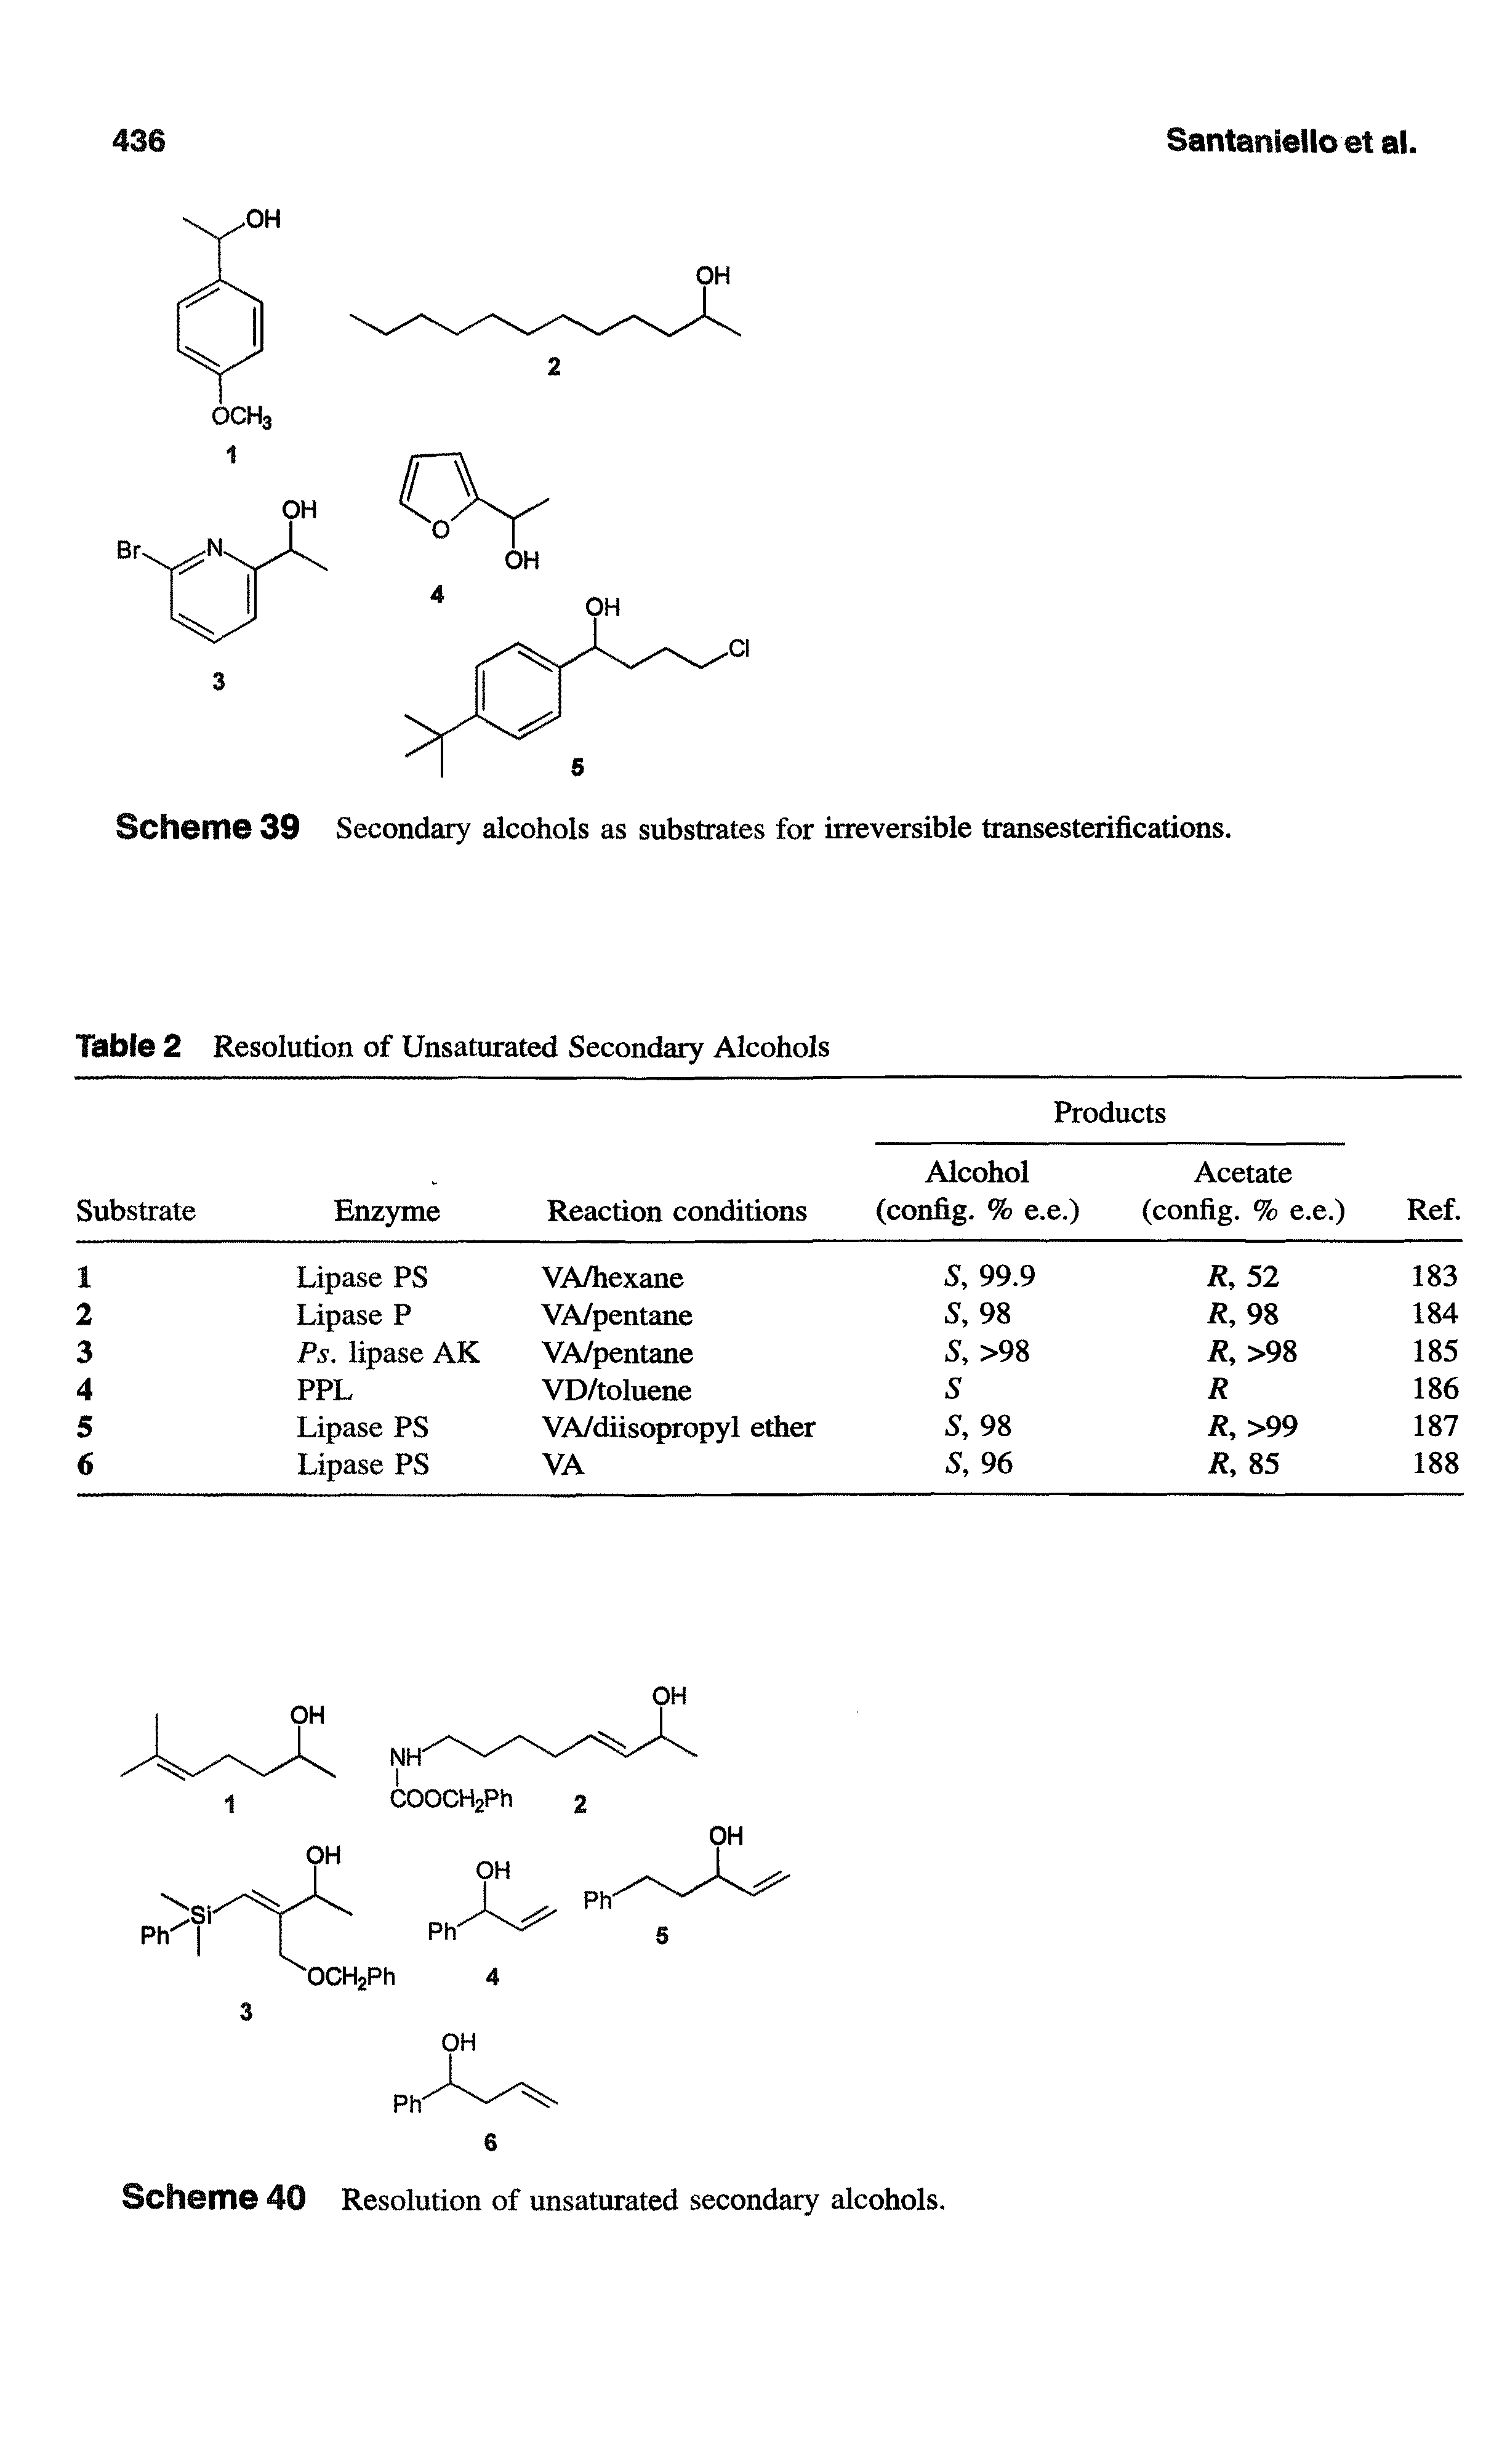 Scheme 39 Secondary alcohols as substrates for irreversible transesterifications.